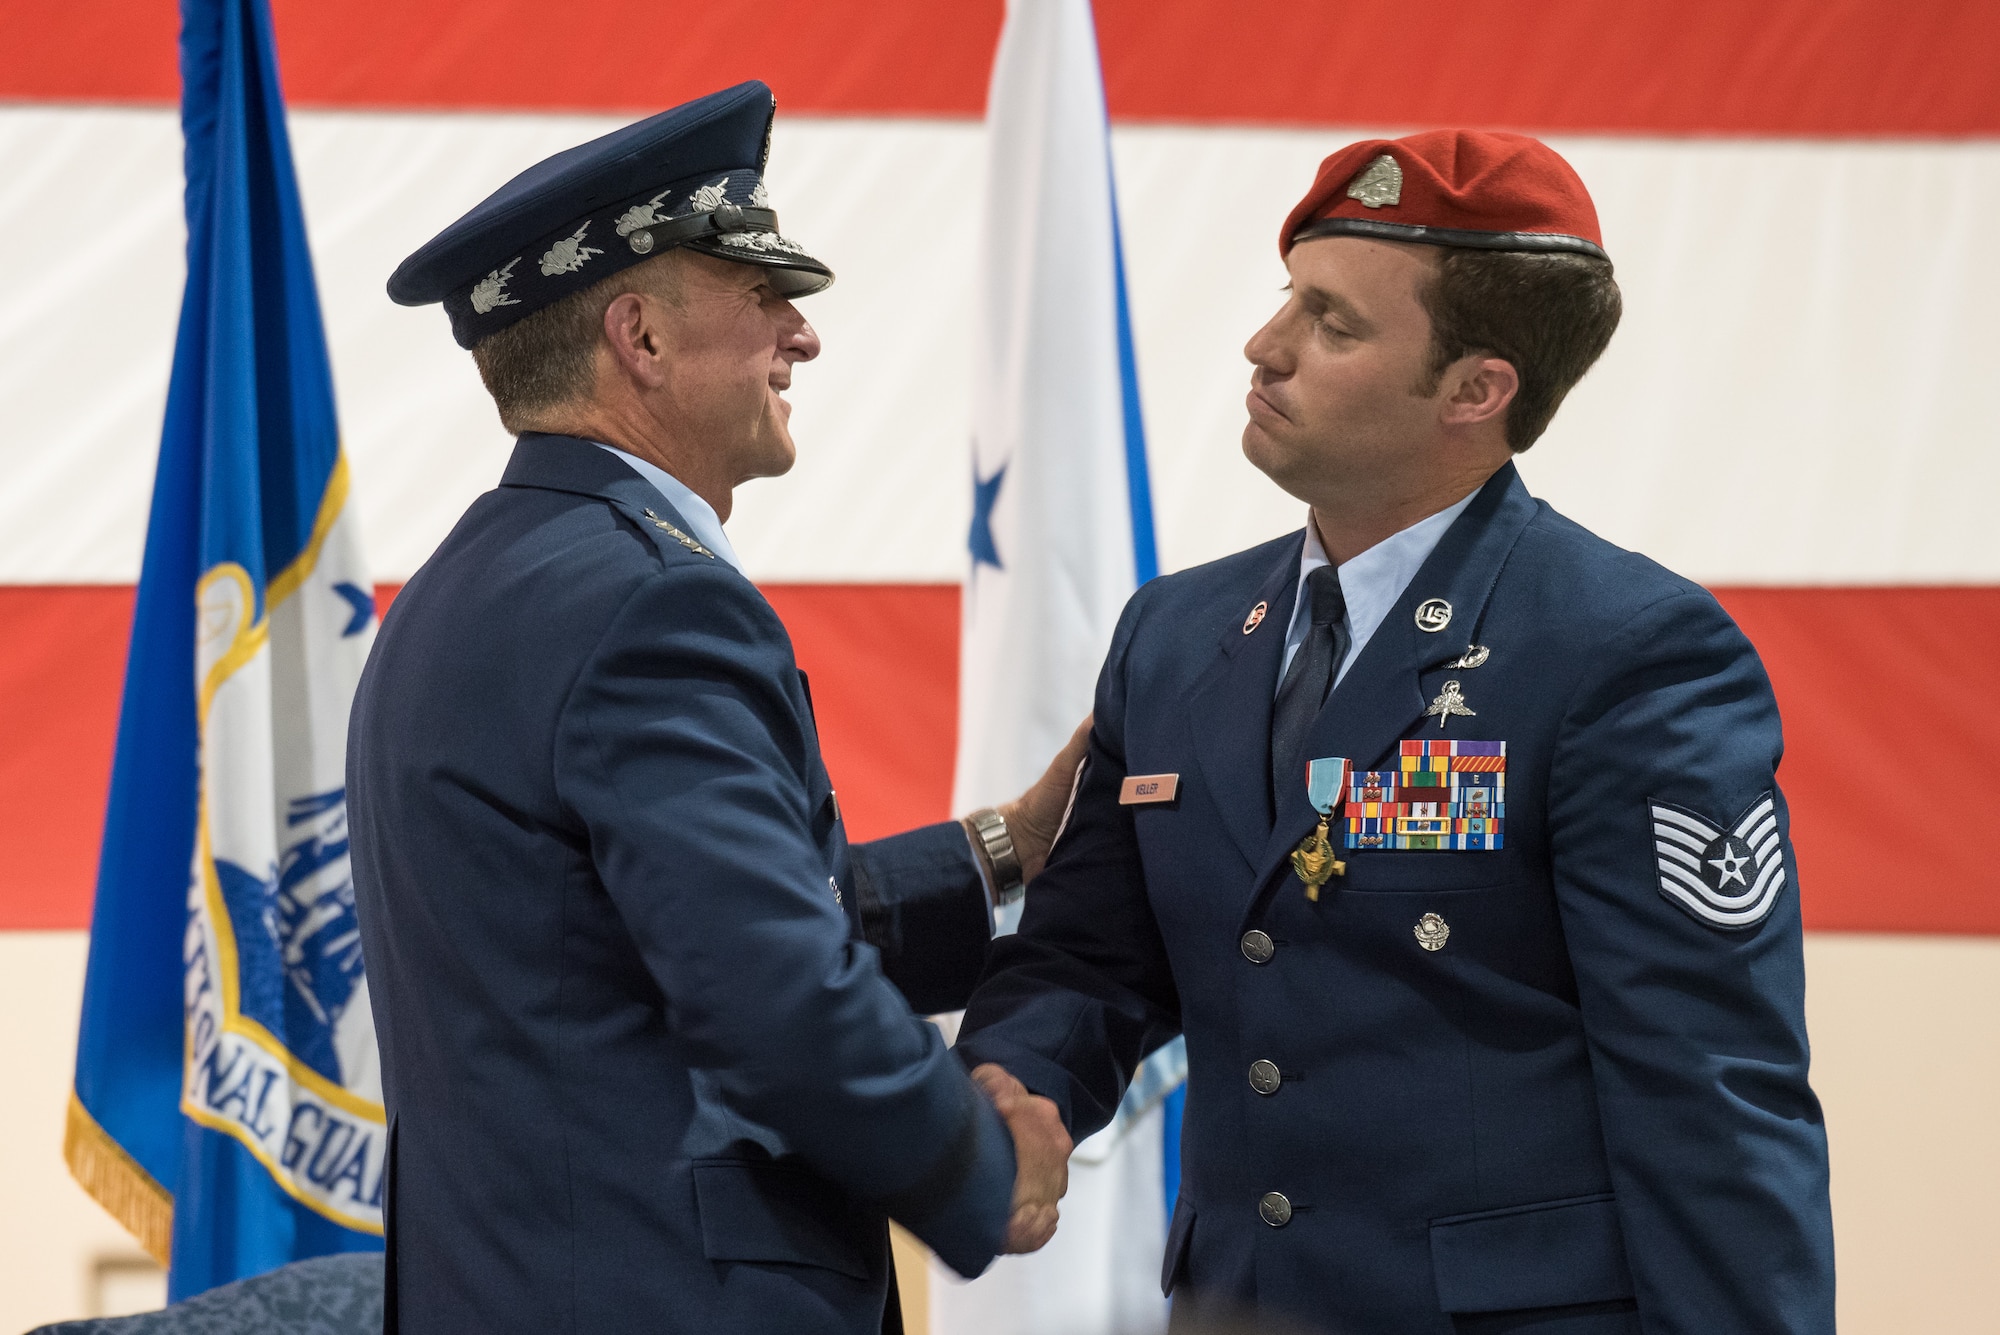 Air Force Chief of Staff Gen. David L. Goldfein (left) shakes hands with Tech. Sgt. Daniel Keller, a combat controller in the 123rd Special Tactics Squadron, during a ceremony at the Kentucky Air National Guard Base in Louisville, Ky, Aug.13, 2019. Earlier in the ceremony, Goldfein presented Keller with the Air Force Cross, which Keller earned for valor on the battlefield in Afghanistan. (U.S. Air National Guard photo by Dale Greer)